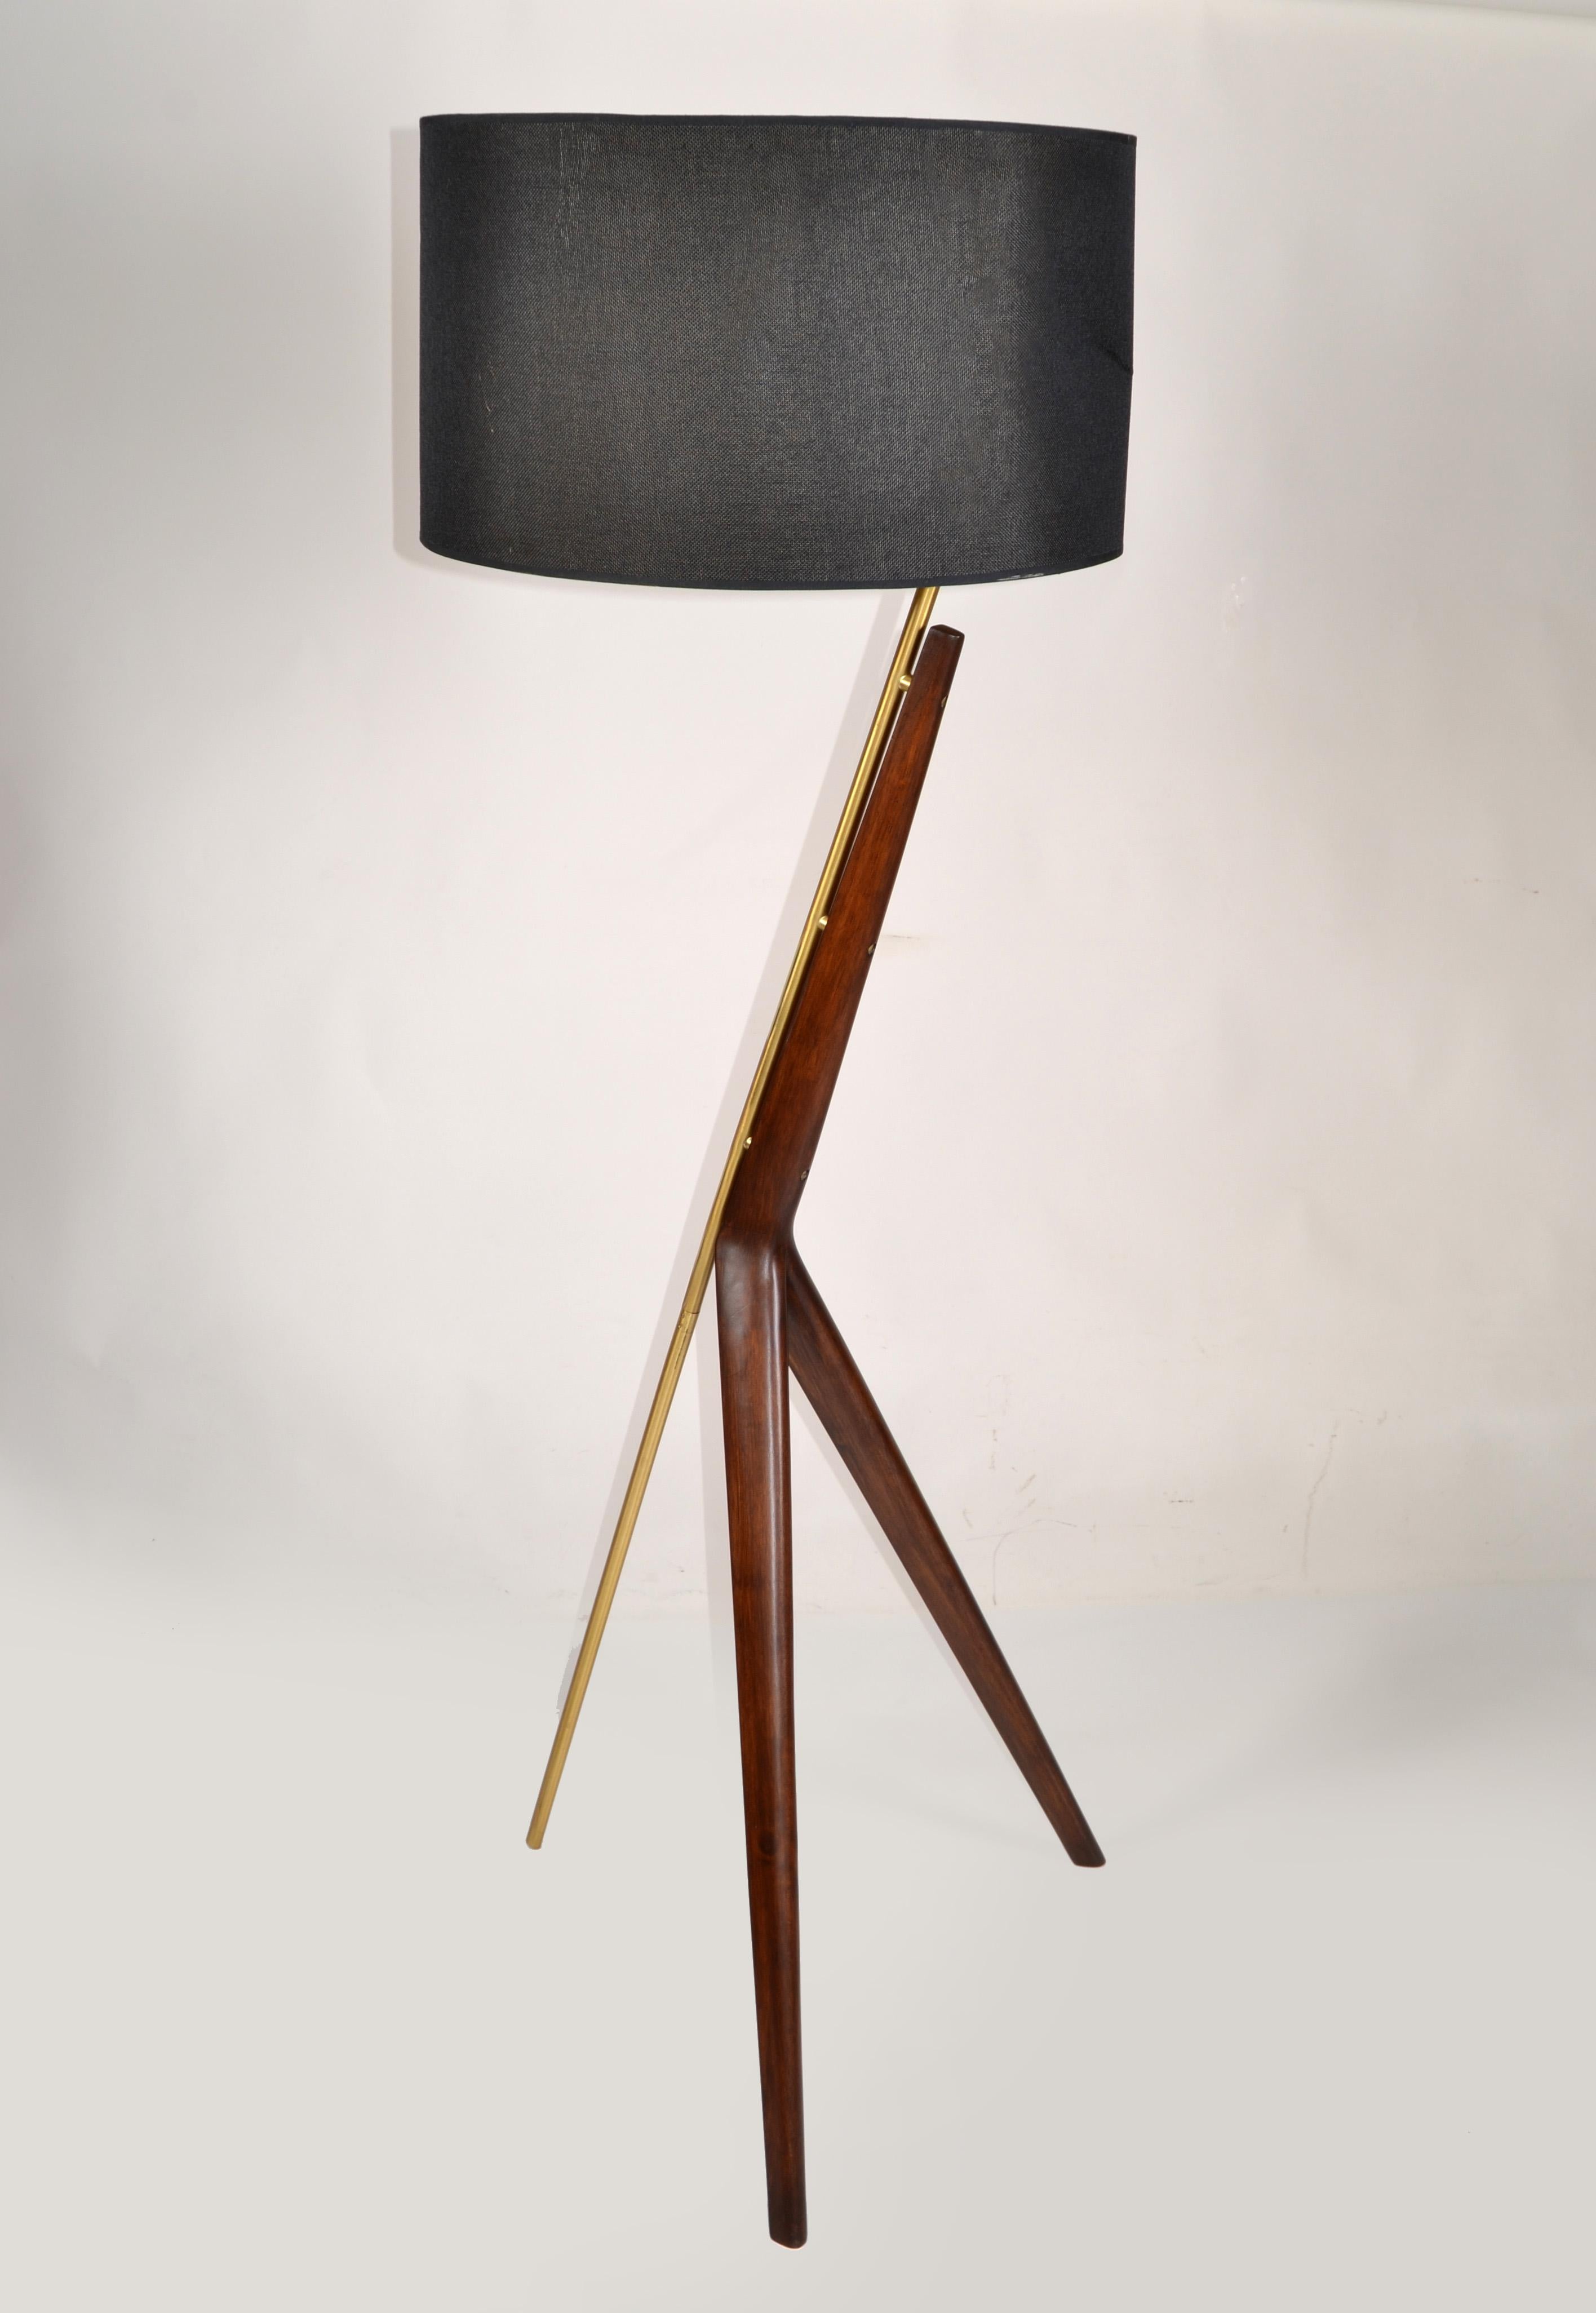 Mid-Century Modern Brazilian sculpted bold angles of design Floor Lamp.  Designed with a striking tripod base that's crafted from solid Walnut Wood and accented with antique-brass finished metal.
It can be complemented by a large Linen Lamp Shade